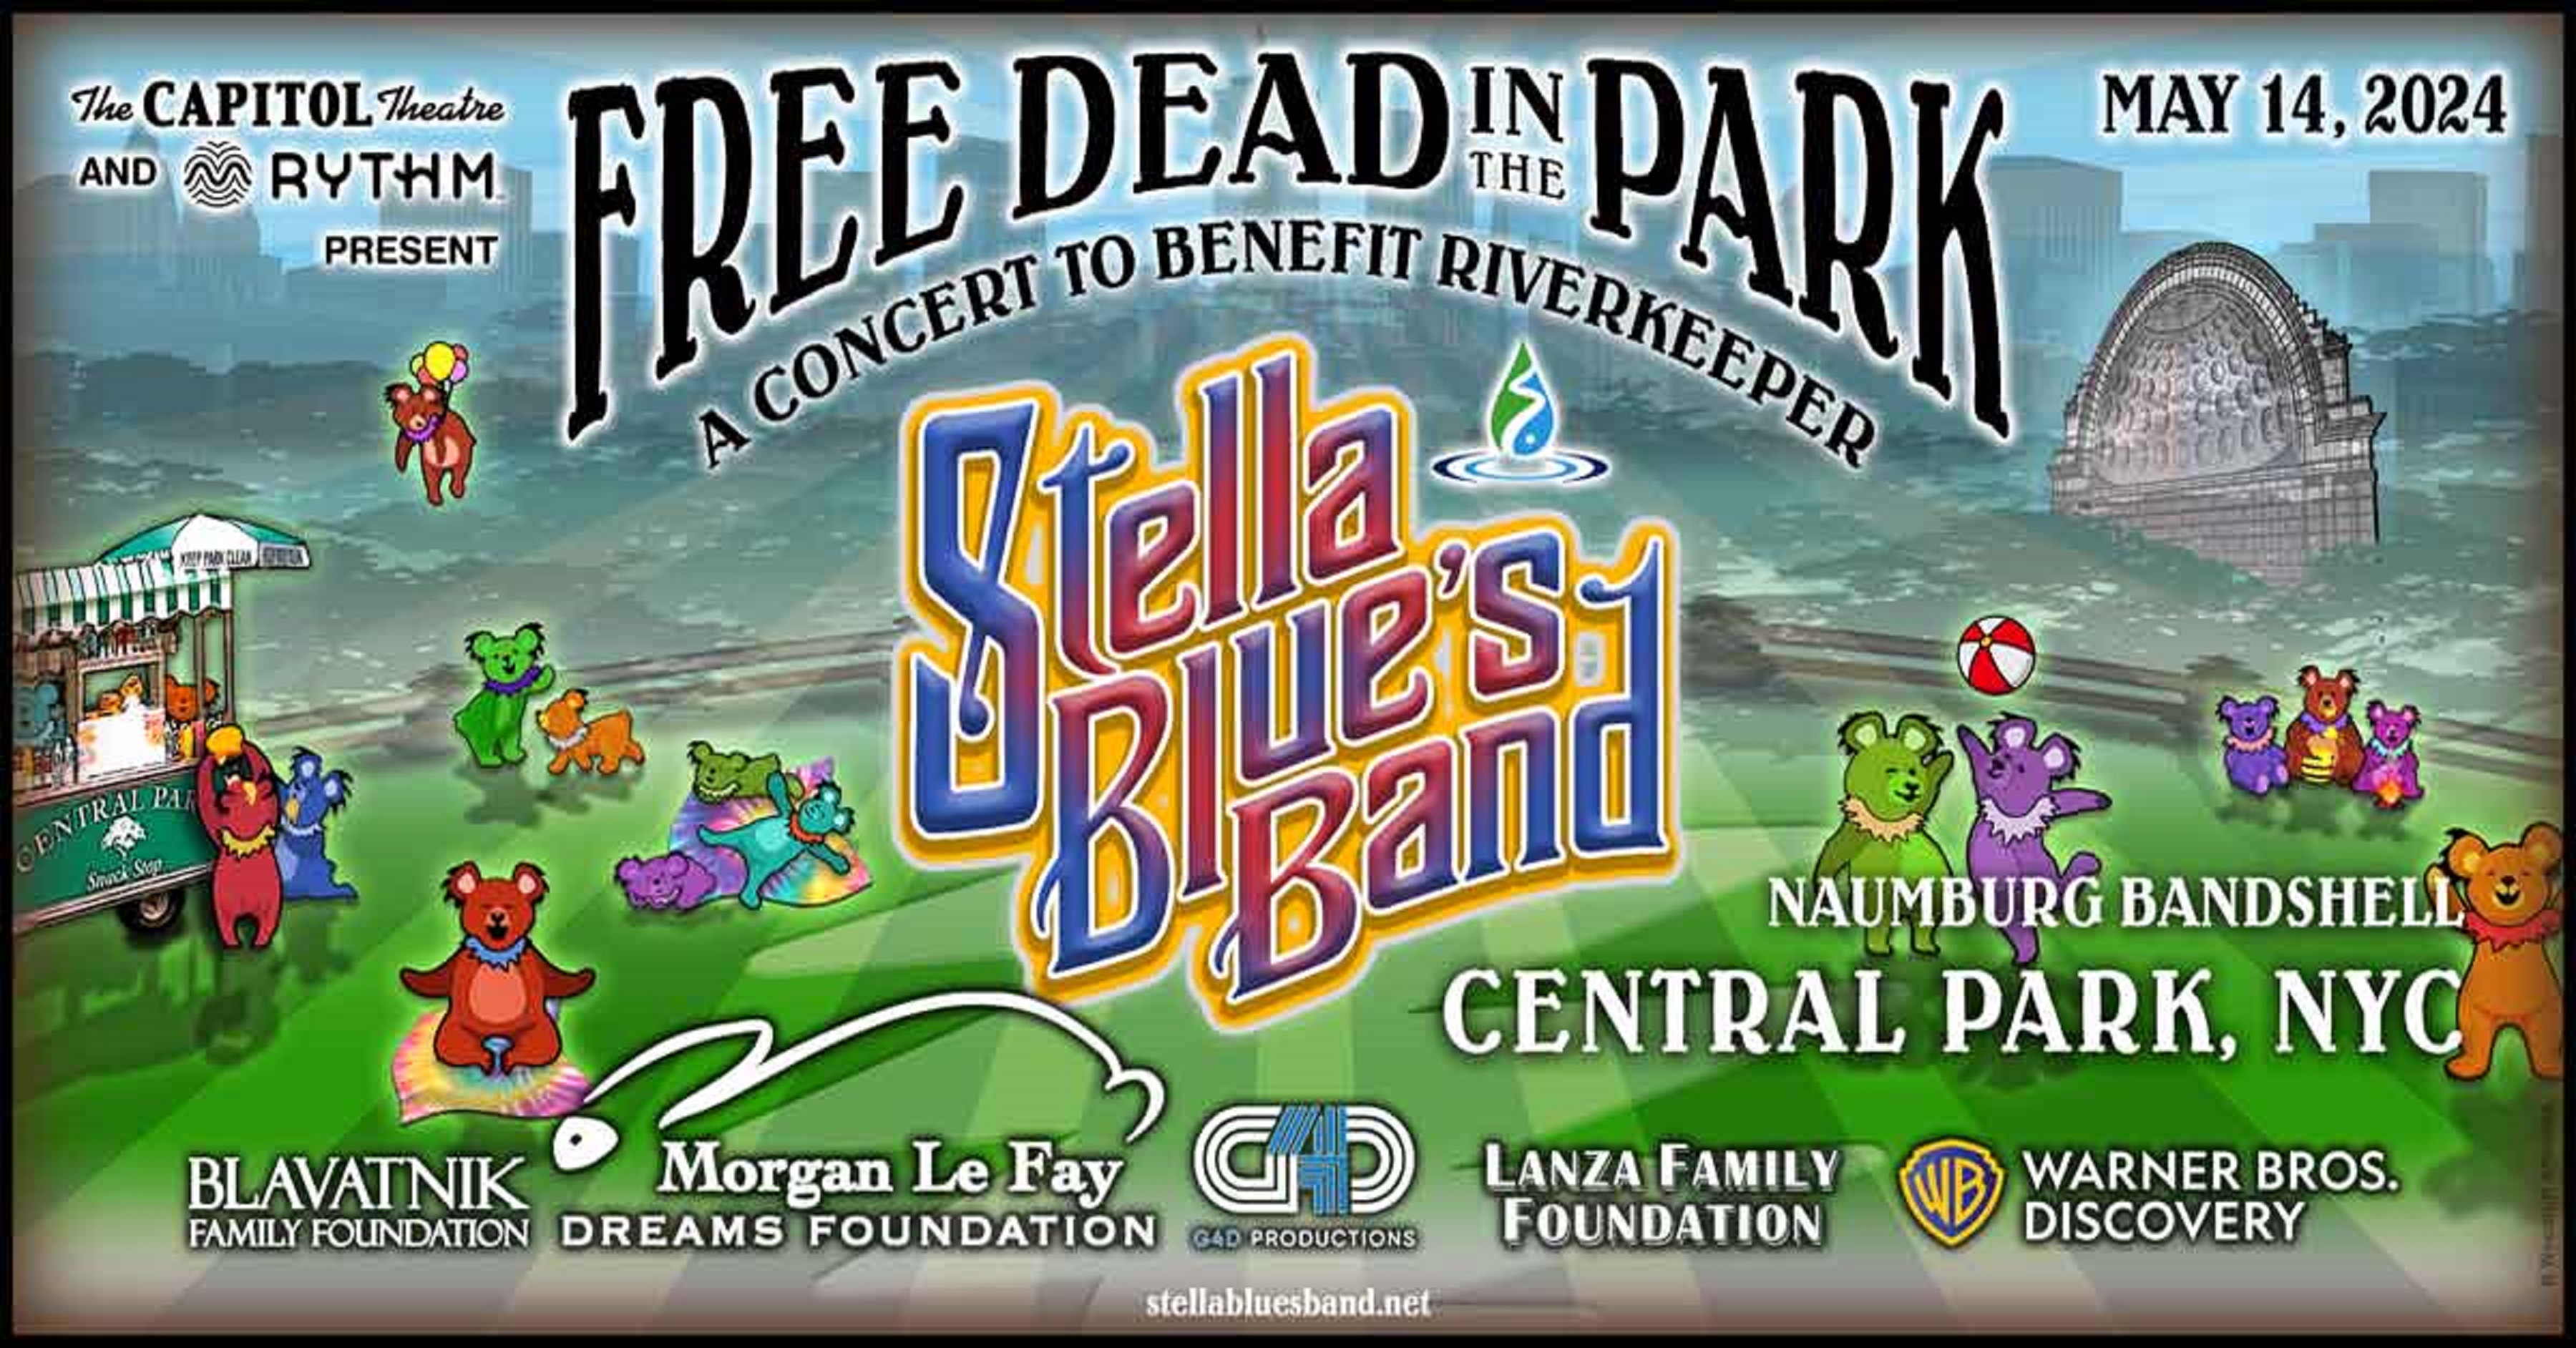 Stella Blue’s Band Announces the 5th Annual Free Dead in the Park Concert